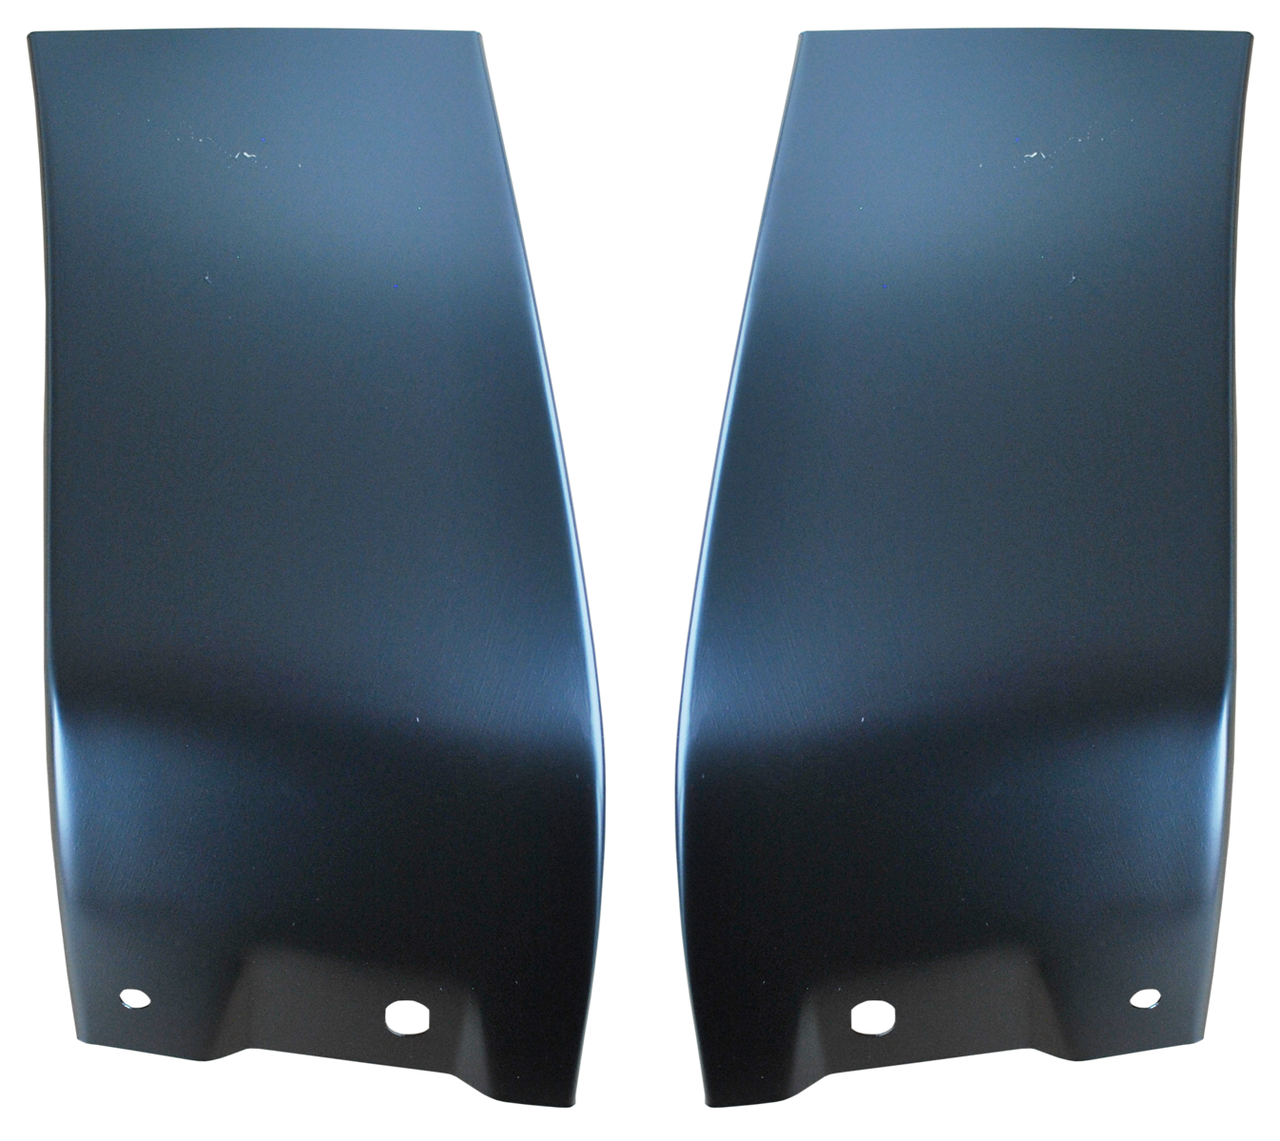 1988-1998 Chevy & Gmc Truck Front Fender-Lower Rear Repair Section (Sold As A Pair)